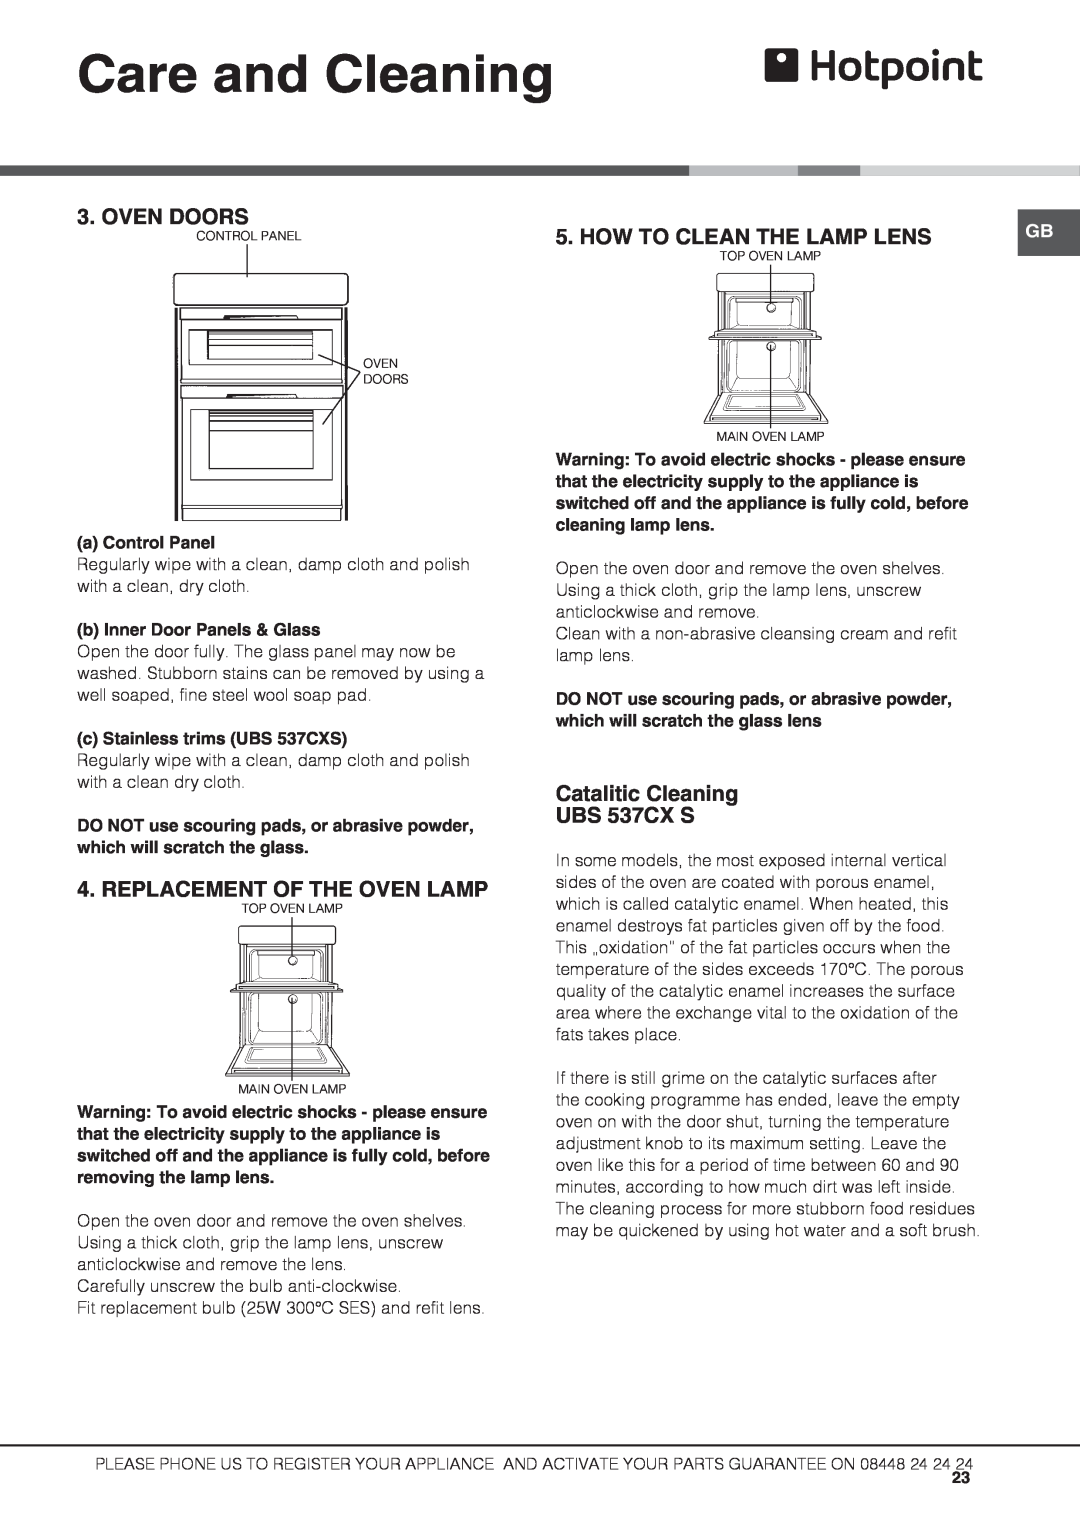 Hotpoint UBS 537 CX S manual Care and Cleaning, Oven Doors, Replacement Of The Oven Lamp, How To Clean The Lamp Lens 